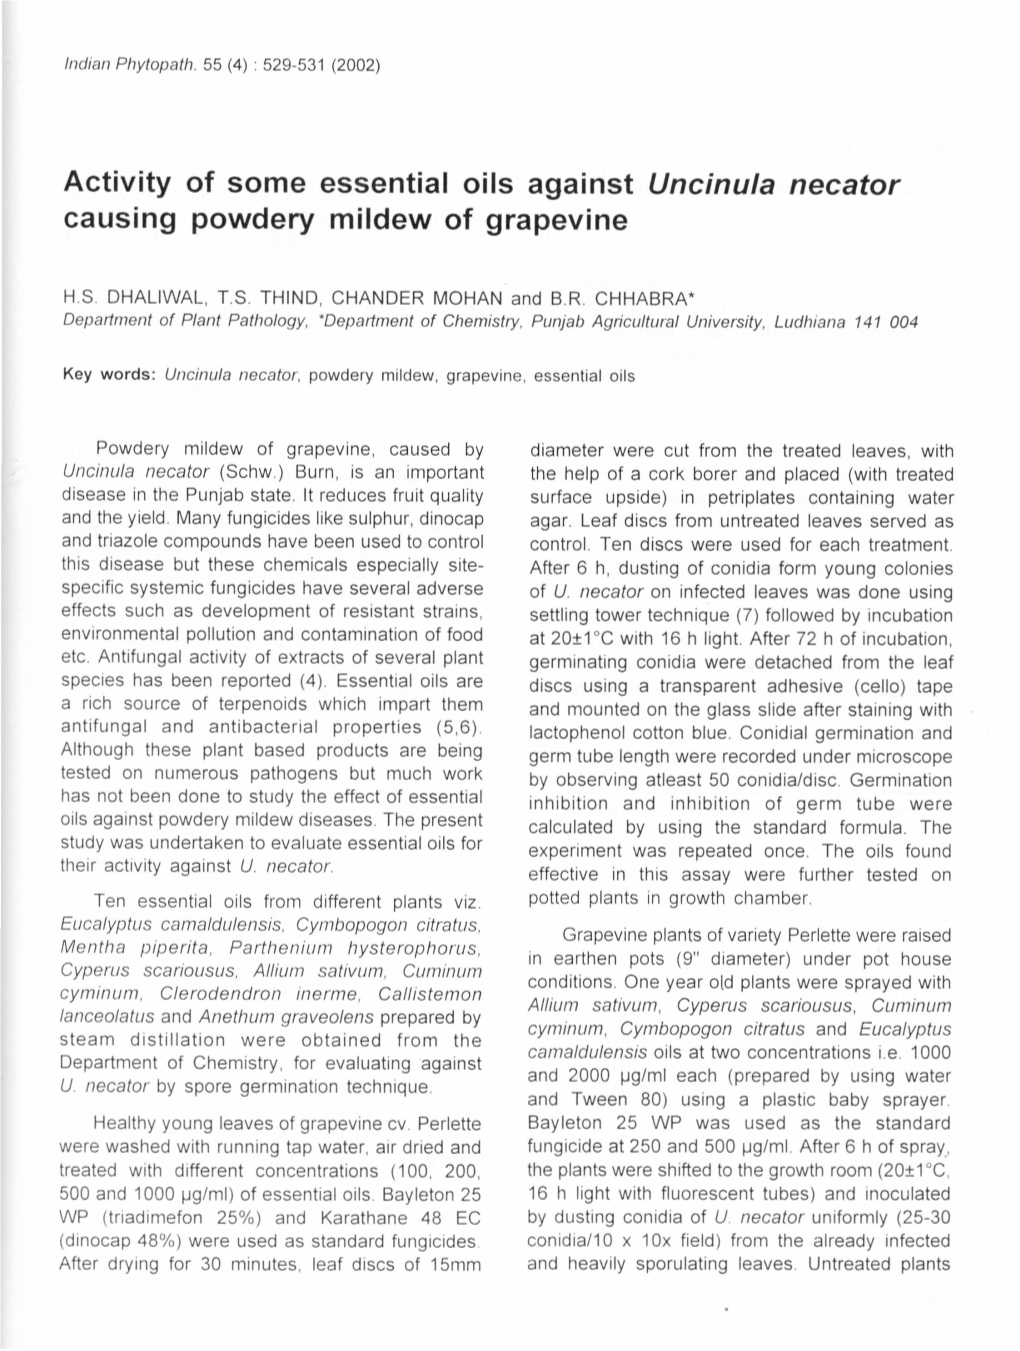 Activity of Some Essential Oils Against Uncinula Necator Causing Powdery Mildew of Grapevine